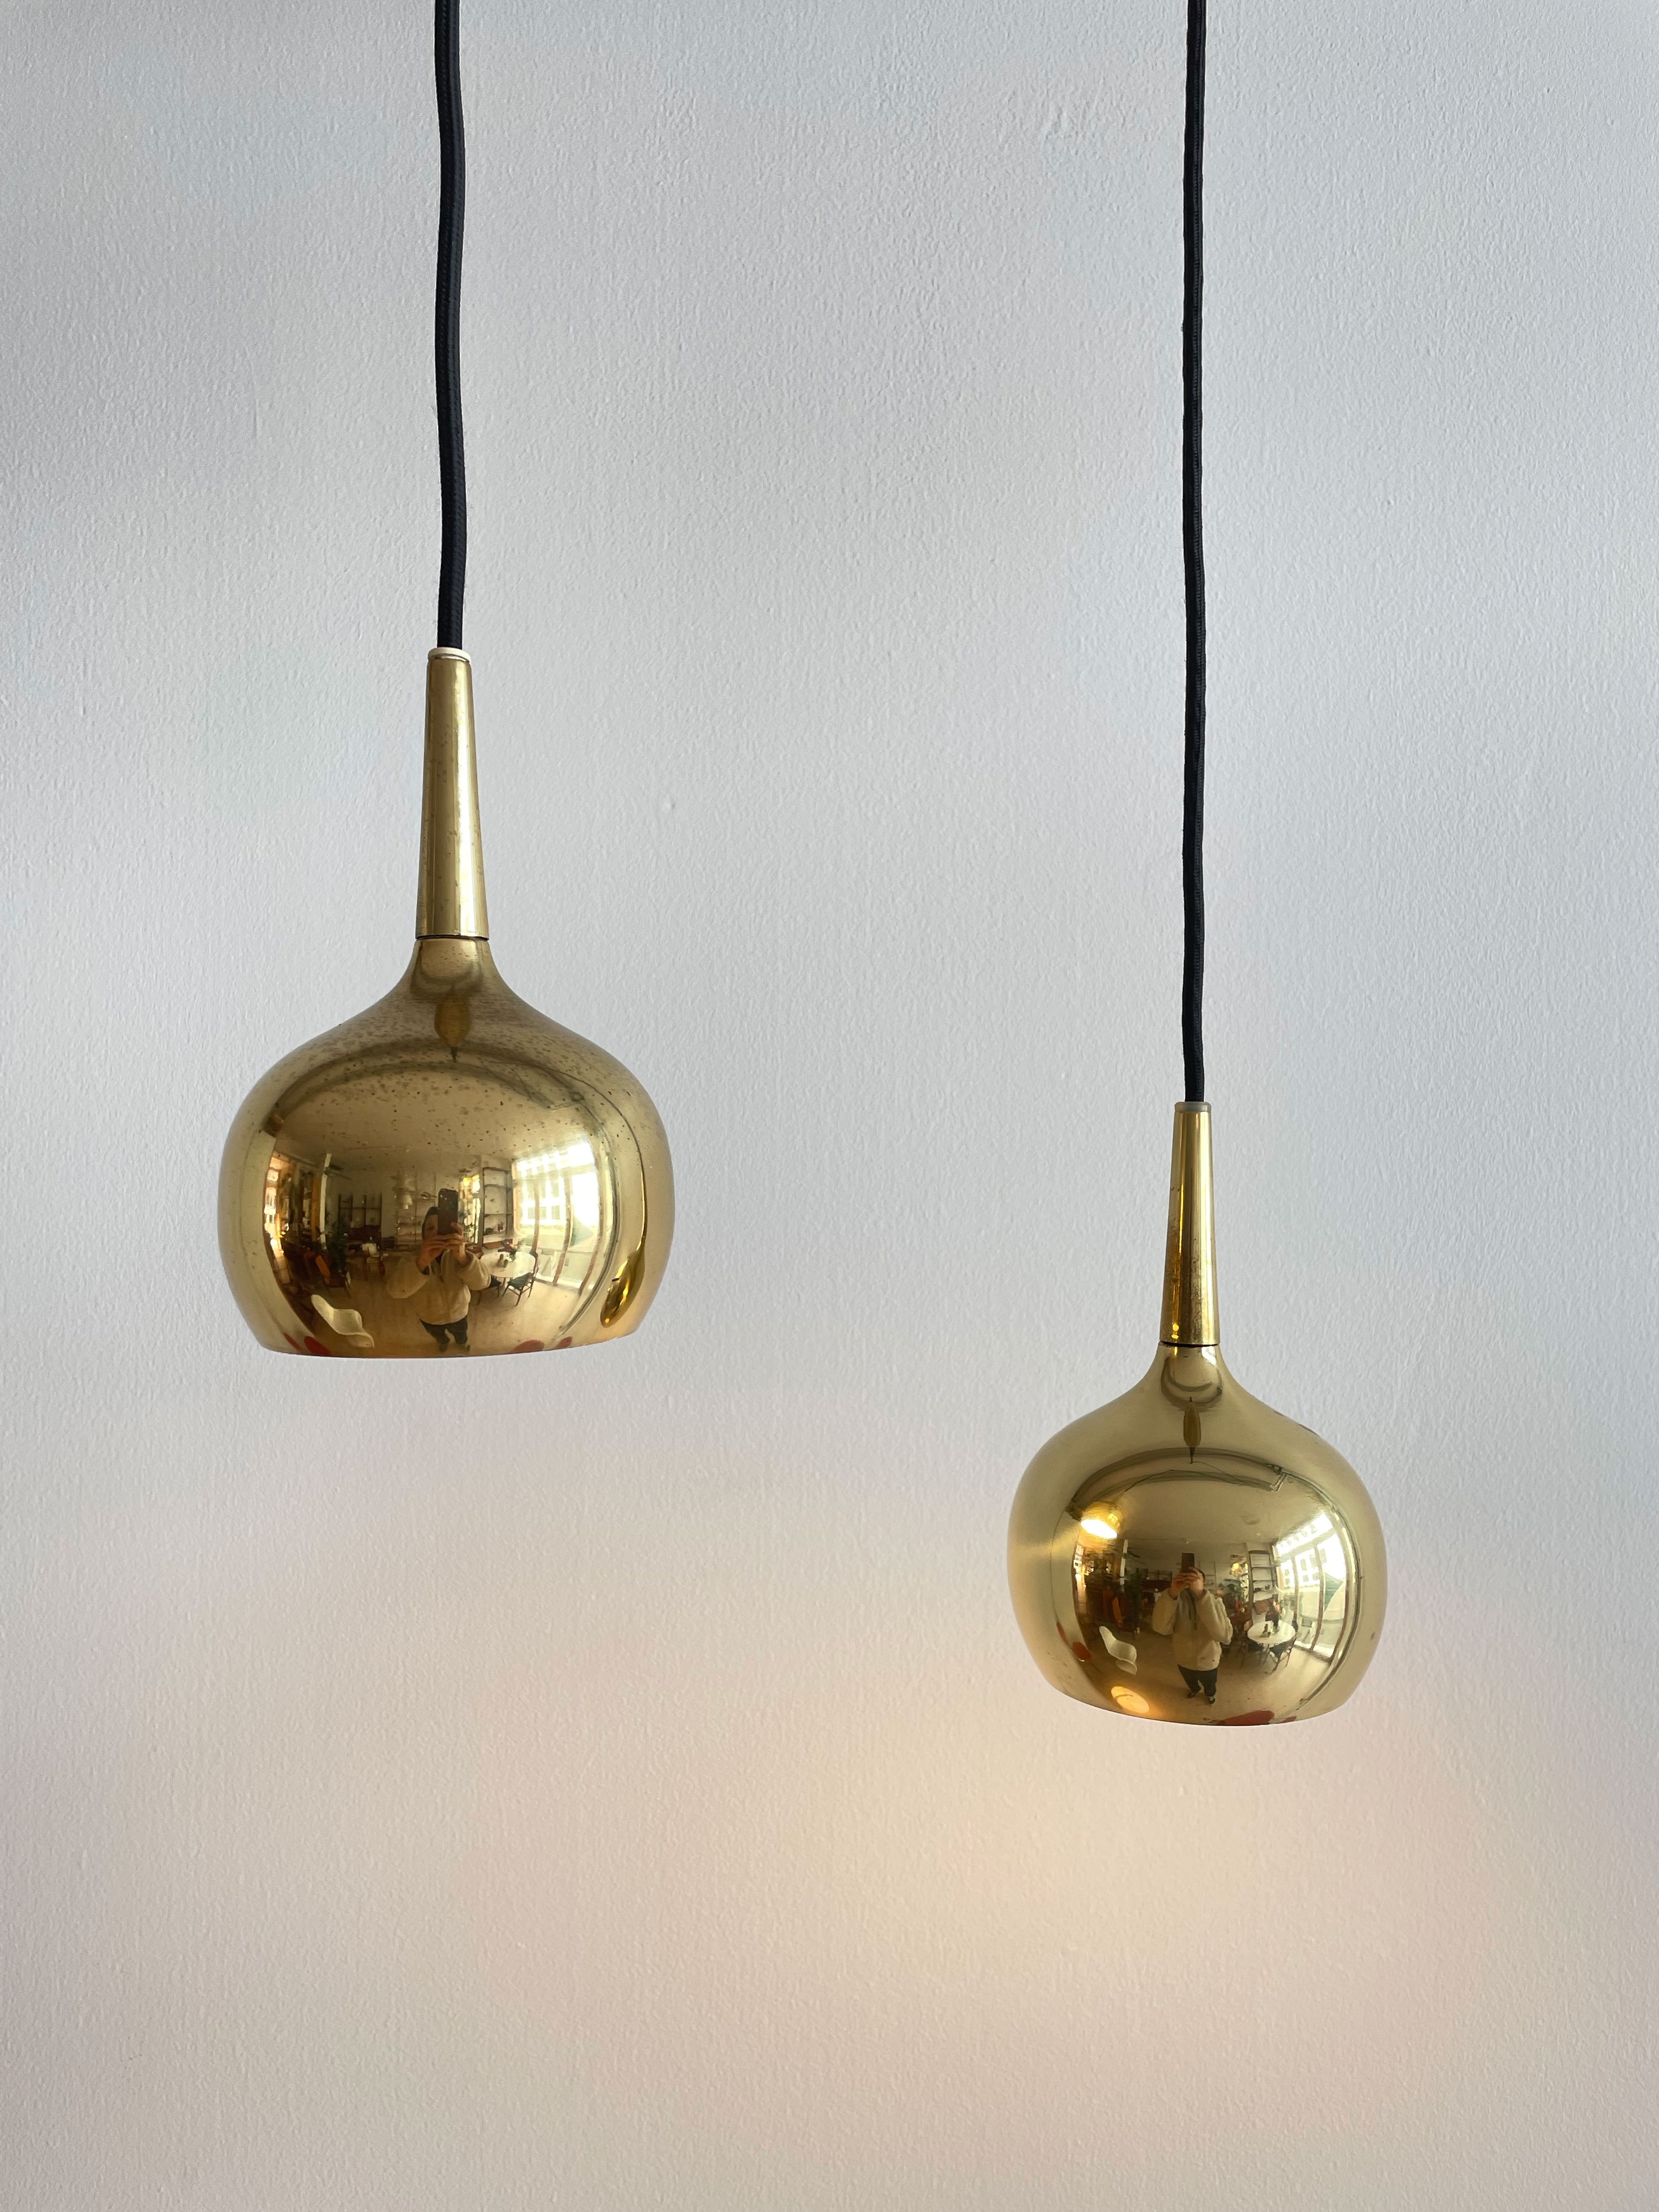 Hans-Agne Jacobsson Small Brass Lamps. Made in Sweden, 1960s. Available at heyday möbel, Grubenstrasse 19, 8045 Zürich,. Switzerland. Mid-Century Modern Furniture and Other Stuff.